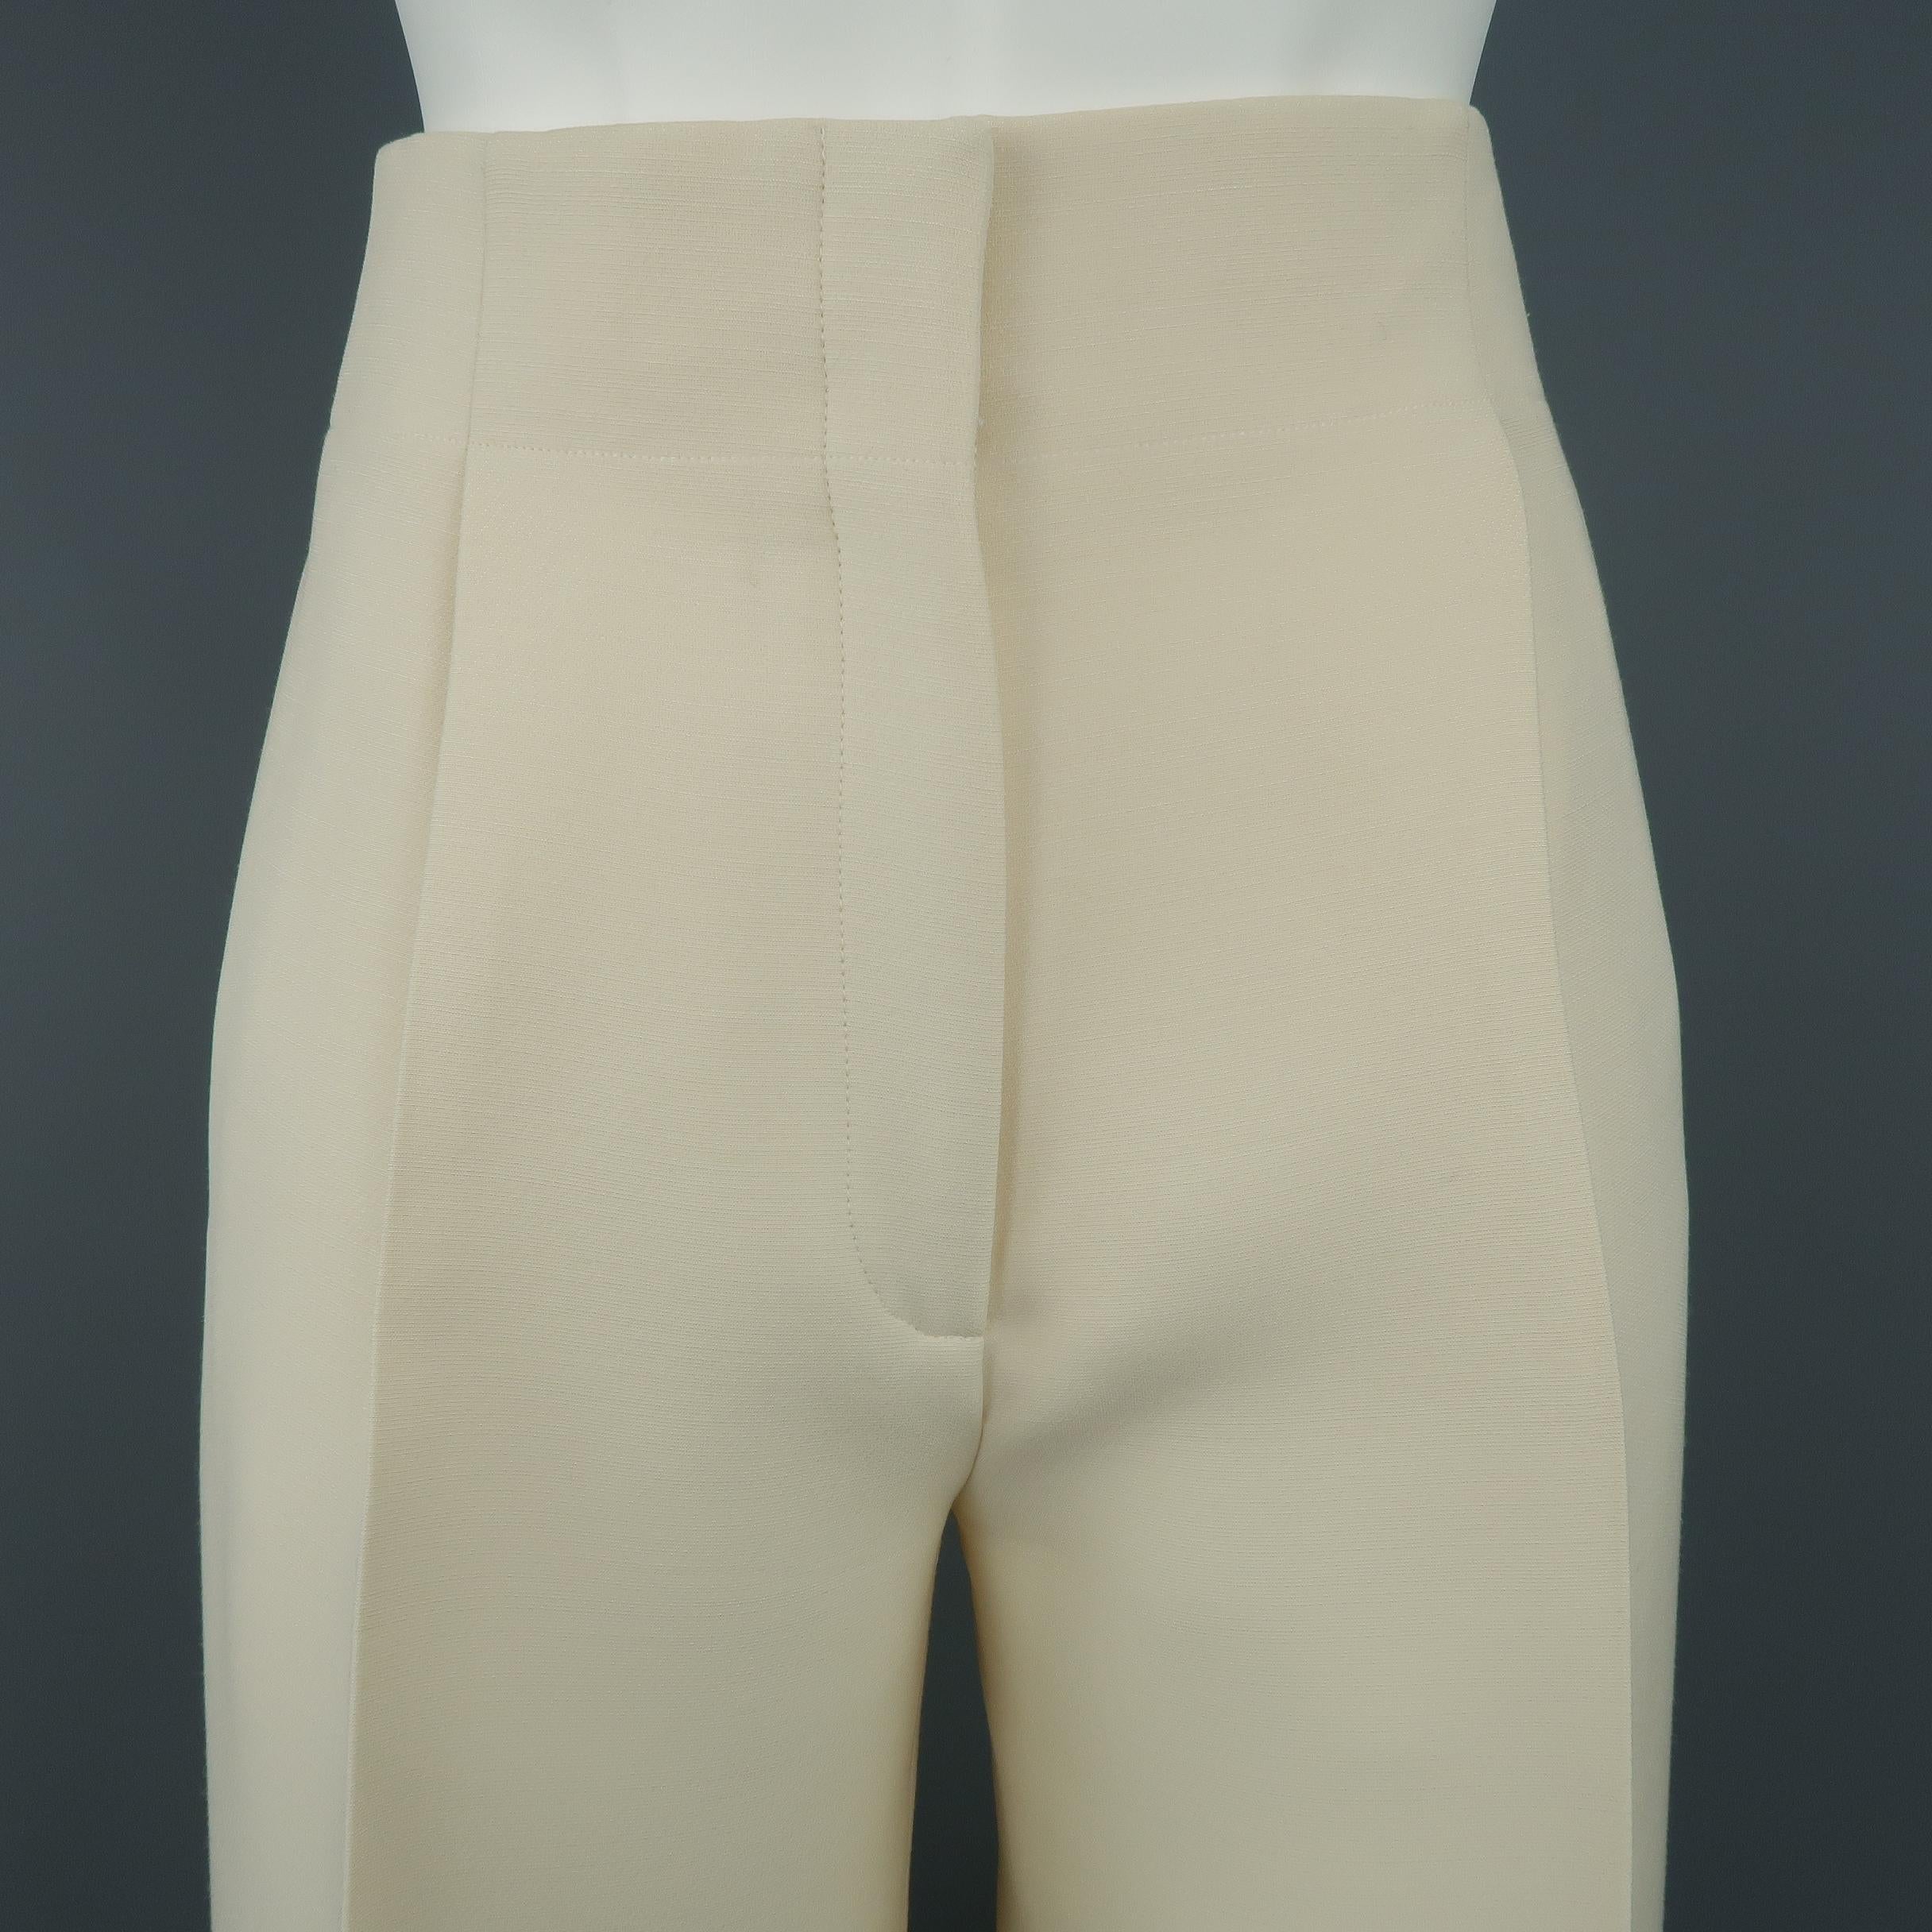 CELINE Resort 2015 culotte dress pants come in cream wool silk blend material with a high rise, single pleat front, and cropped wide leg. Made in Italy.
 
Excellent Pre-Owned Condition.
Marked: FR 34
 
Measurements:
 
Waist: 26 in.
Rise: 12